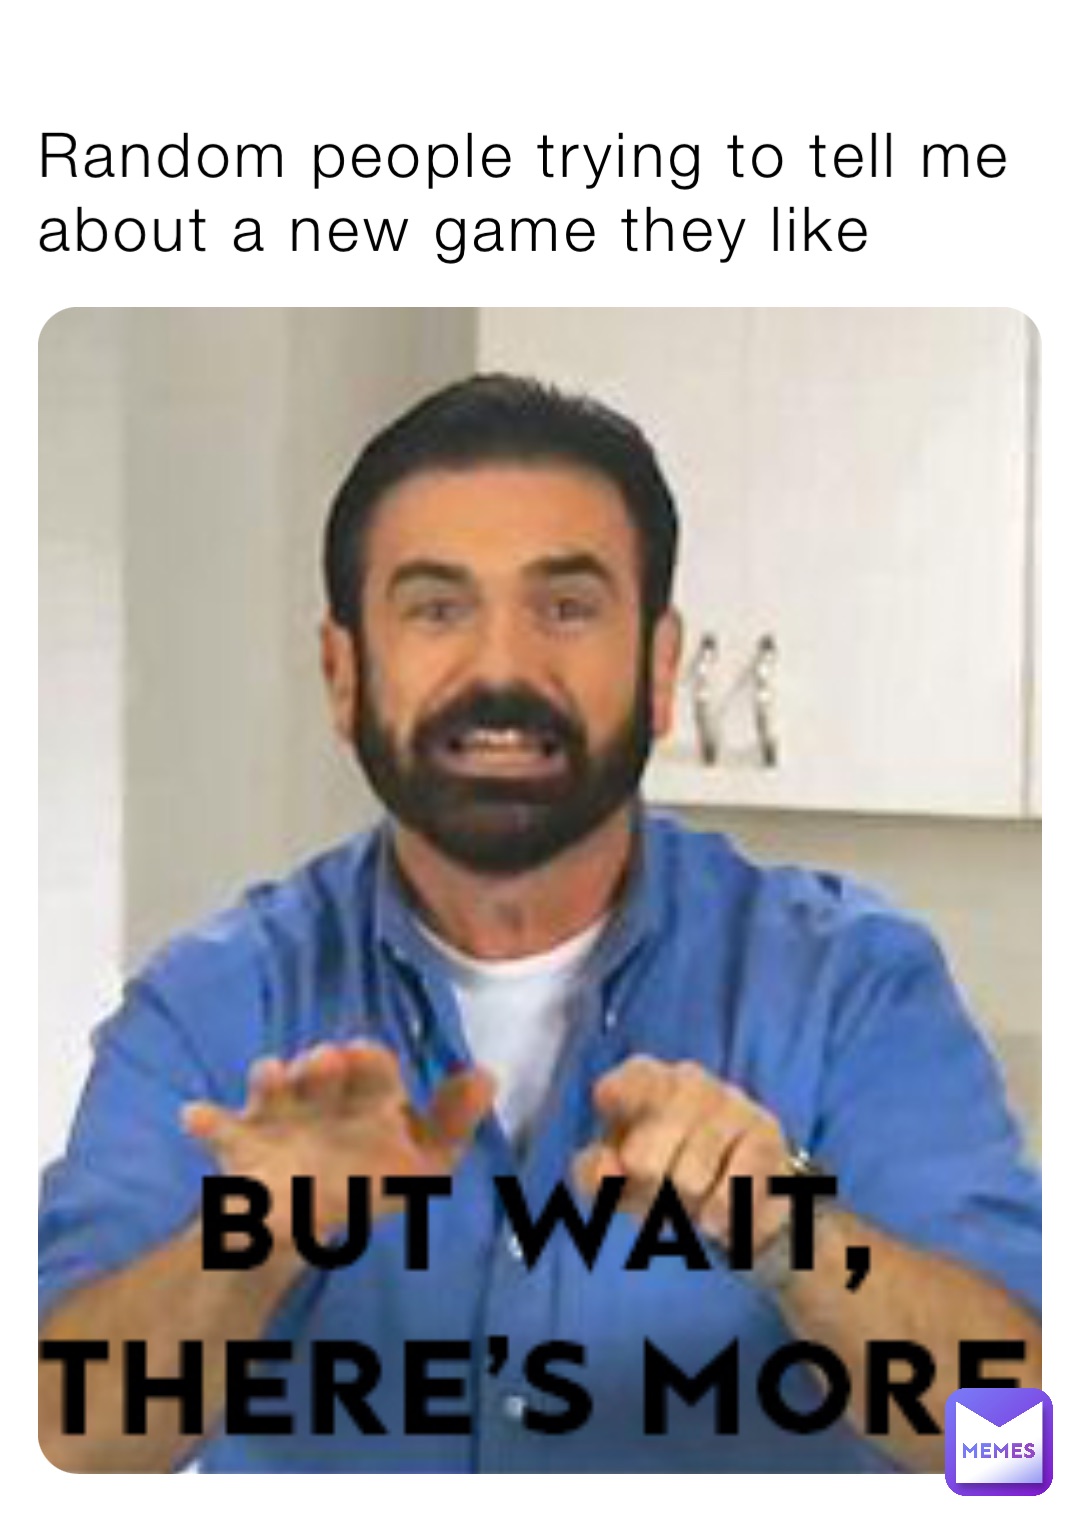 Random people trying to tell me about a new game they like